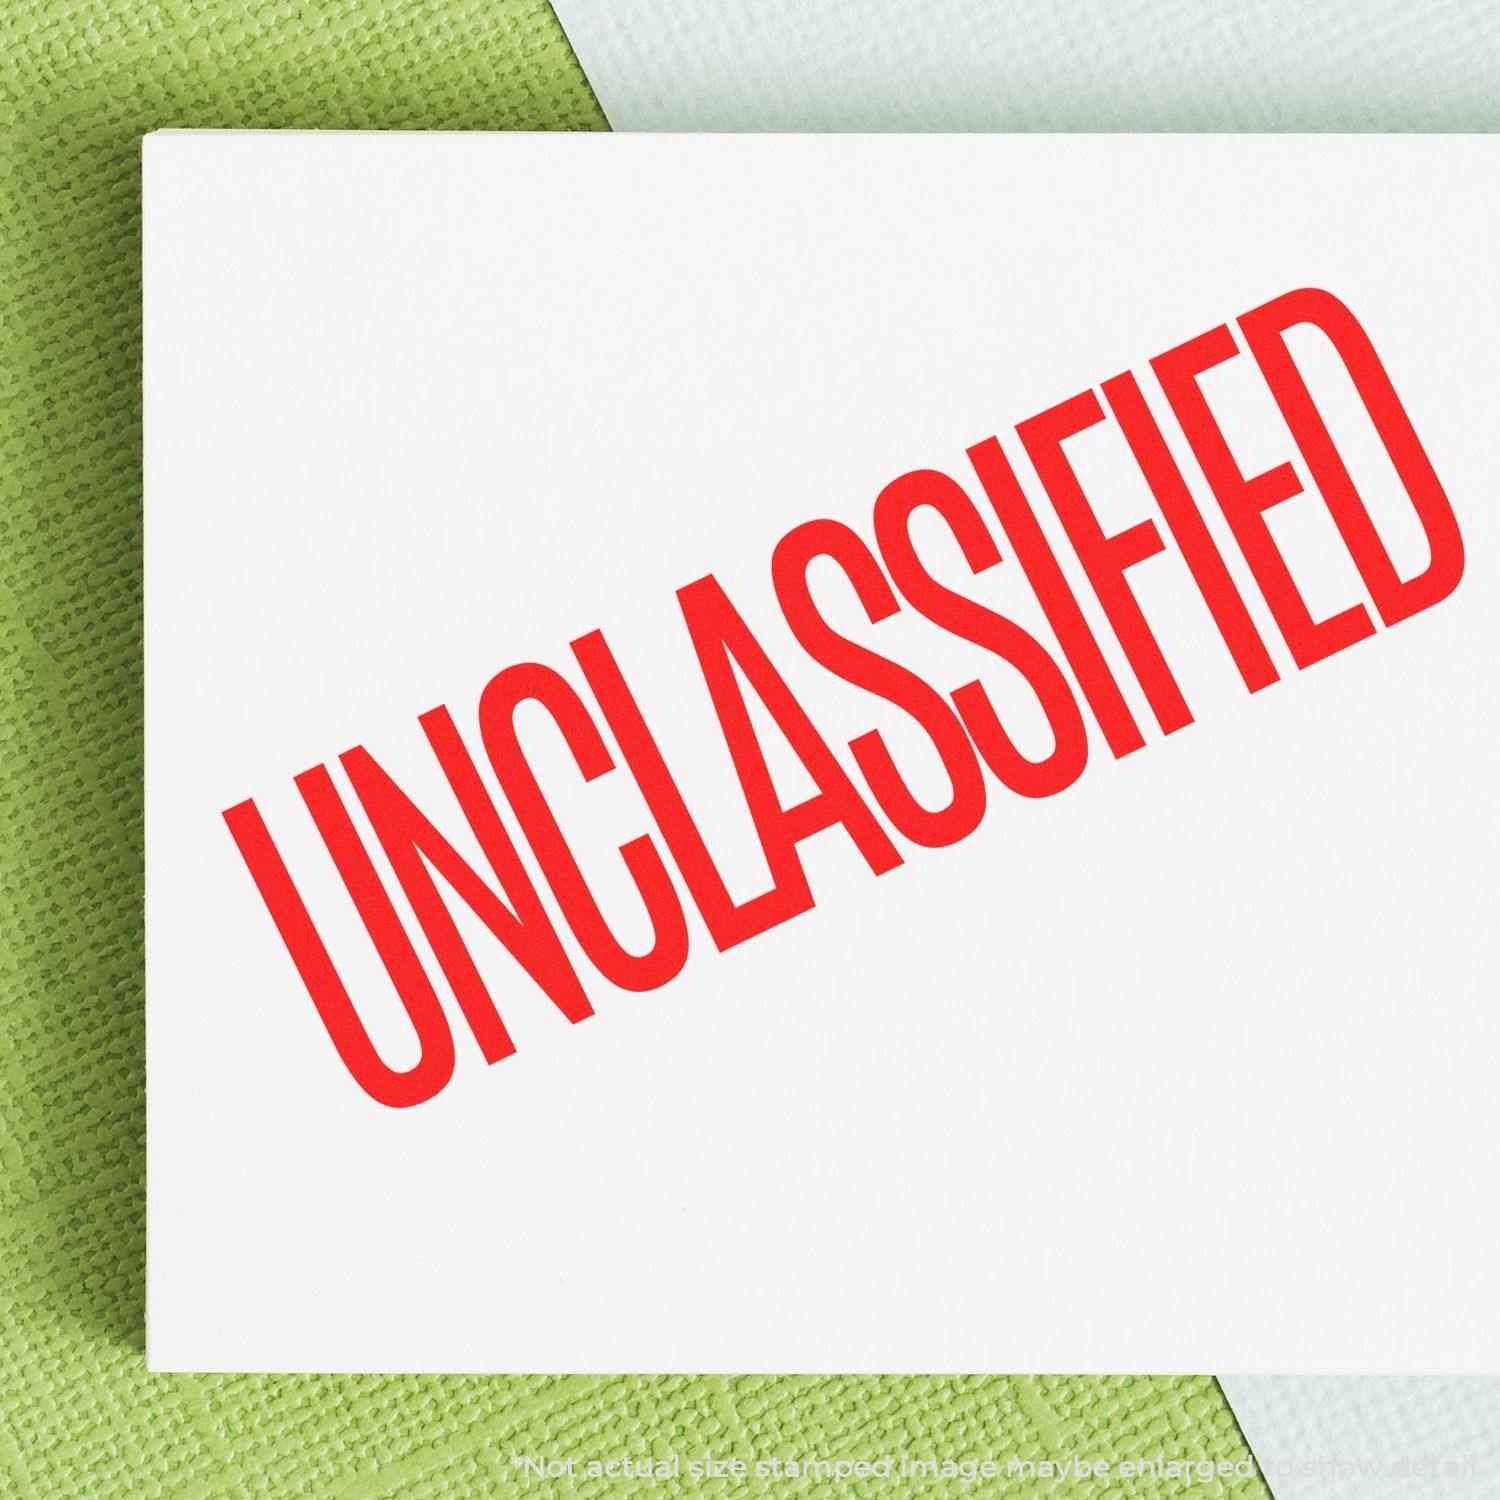 A stock office rubber stamp with a stamped image showing how the text "UNCLASSIFIED" in a large font is displayed after stamping.